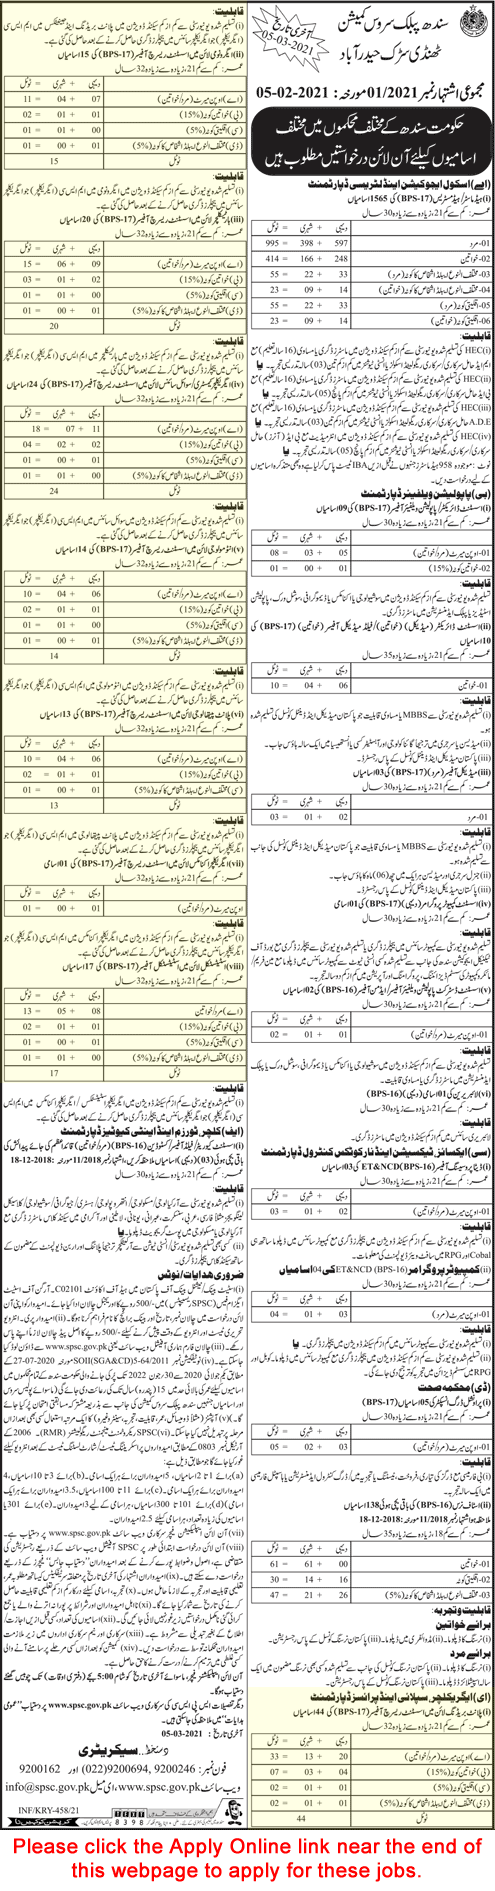 Agriculture Supply and Prices Department Sindh Jobs 2021 February SPSC Online Apply Latest